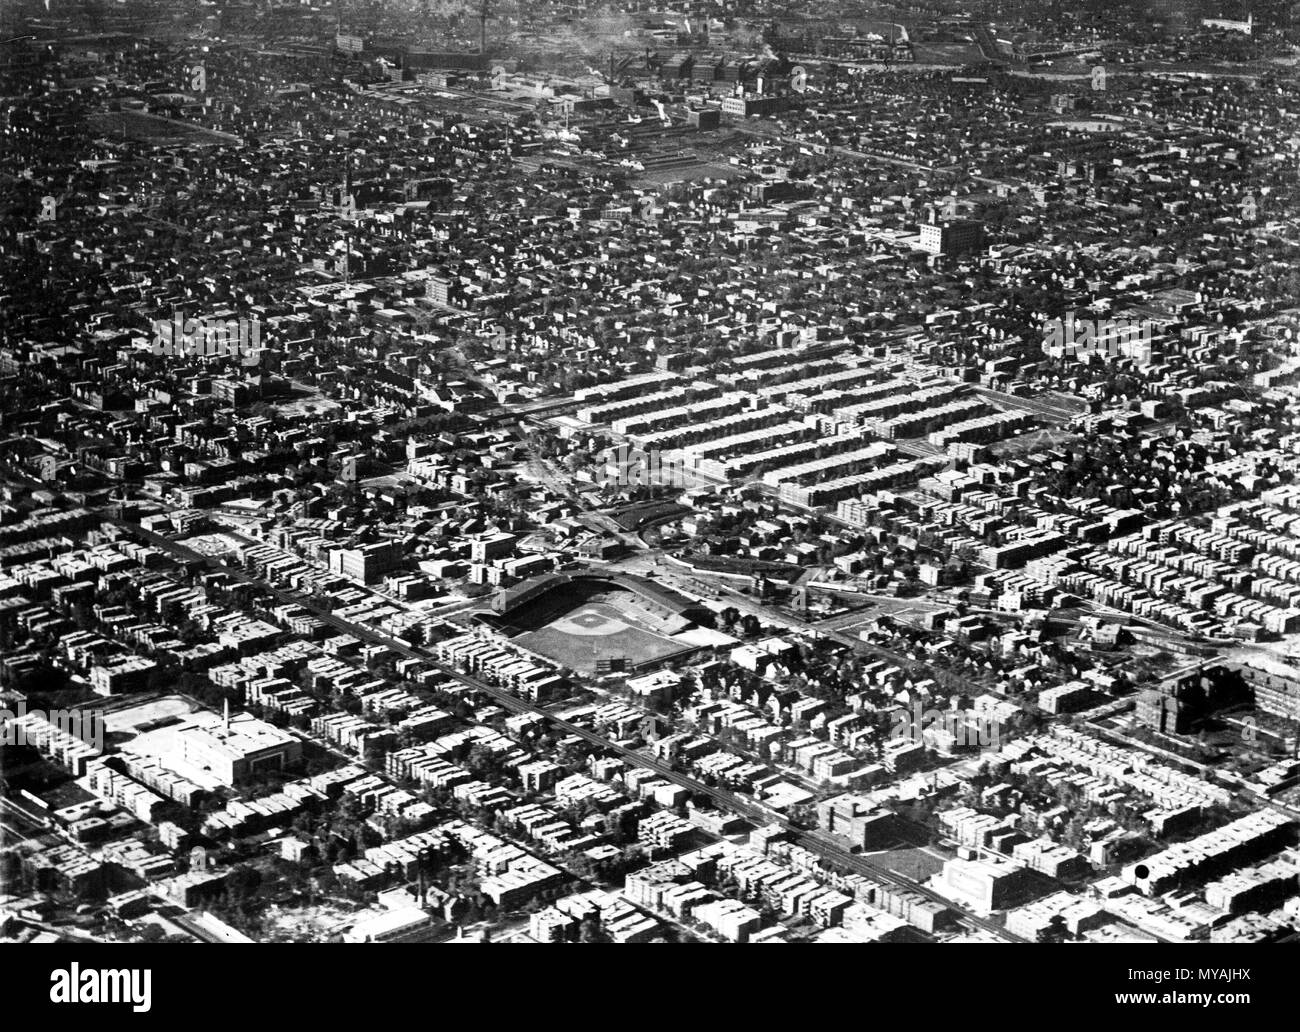 Aerial Photograph of the North Side of Chicago, Illinois 1919 - Weeghman Park (present day Wrigley Field) can be seen in the middle of image. Stock Photo